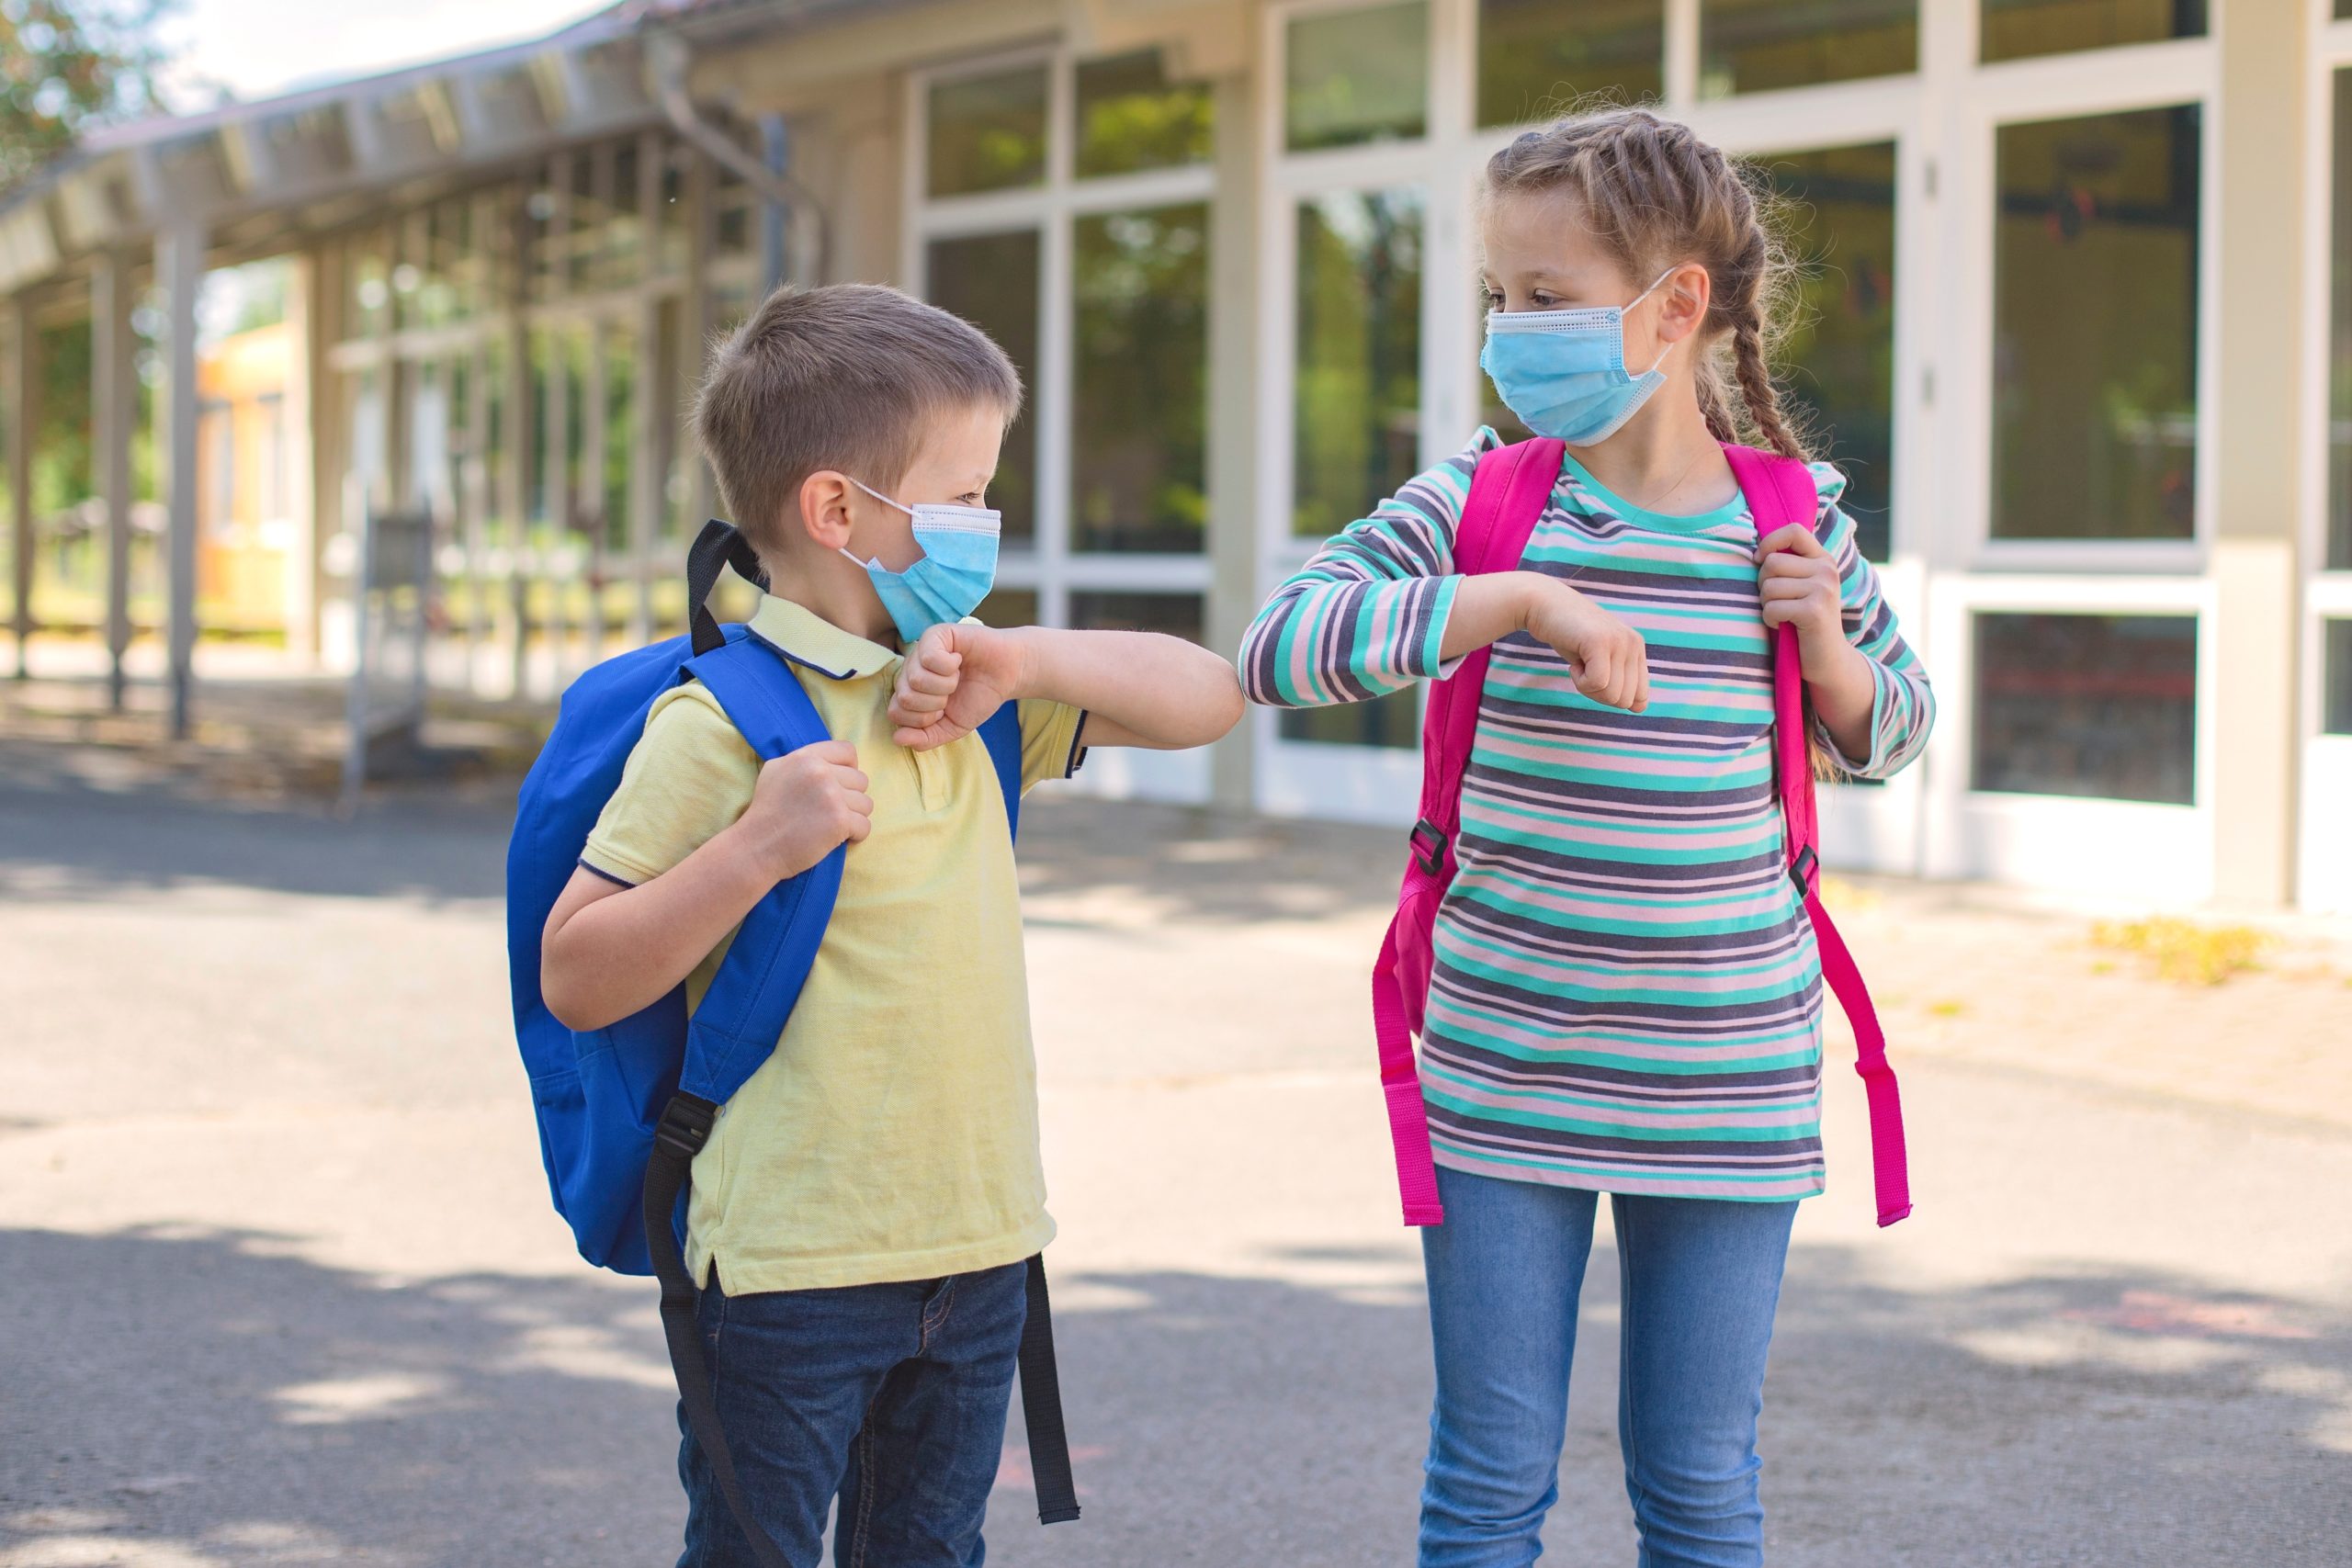 Children, a boy and a girl, wearing masks, greet their elbows on the street in the schoolyard due to the coronavirus epidemic. Distance observance, new school reality.